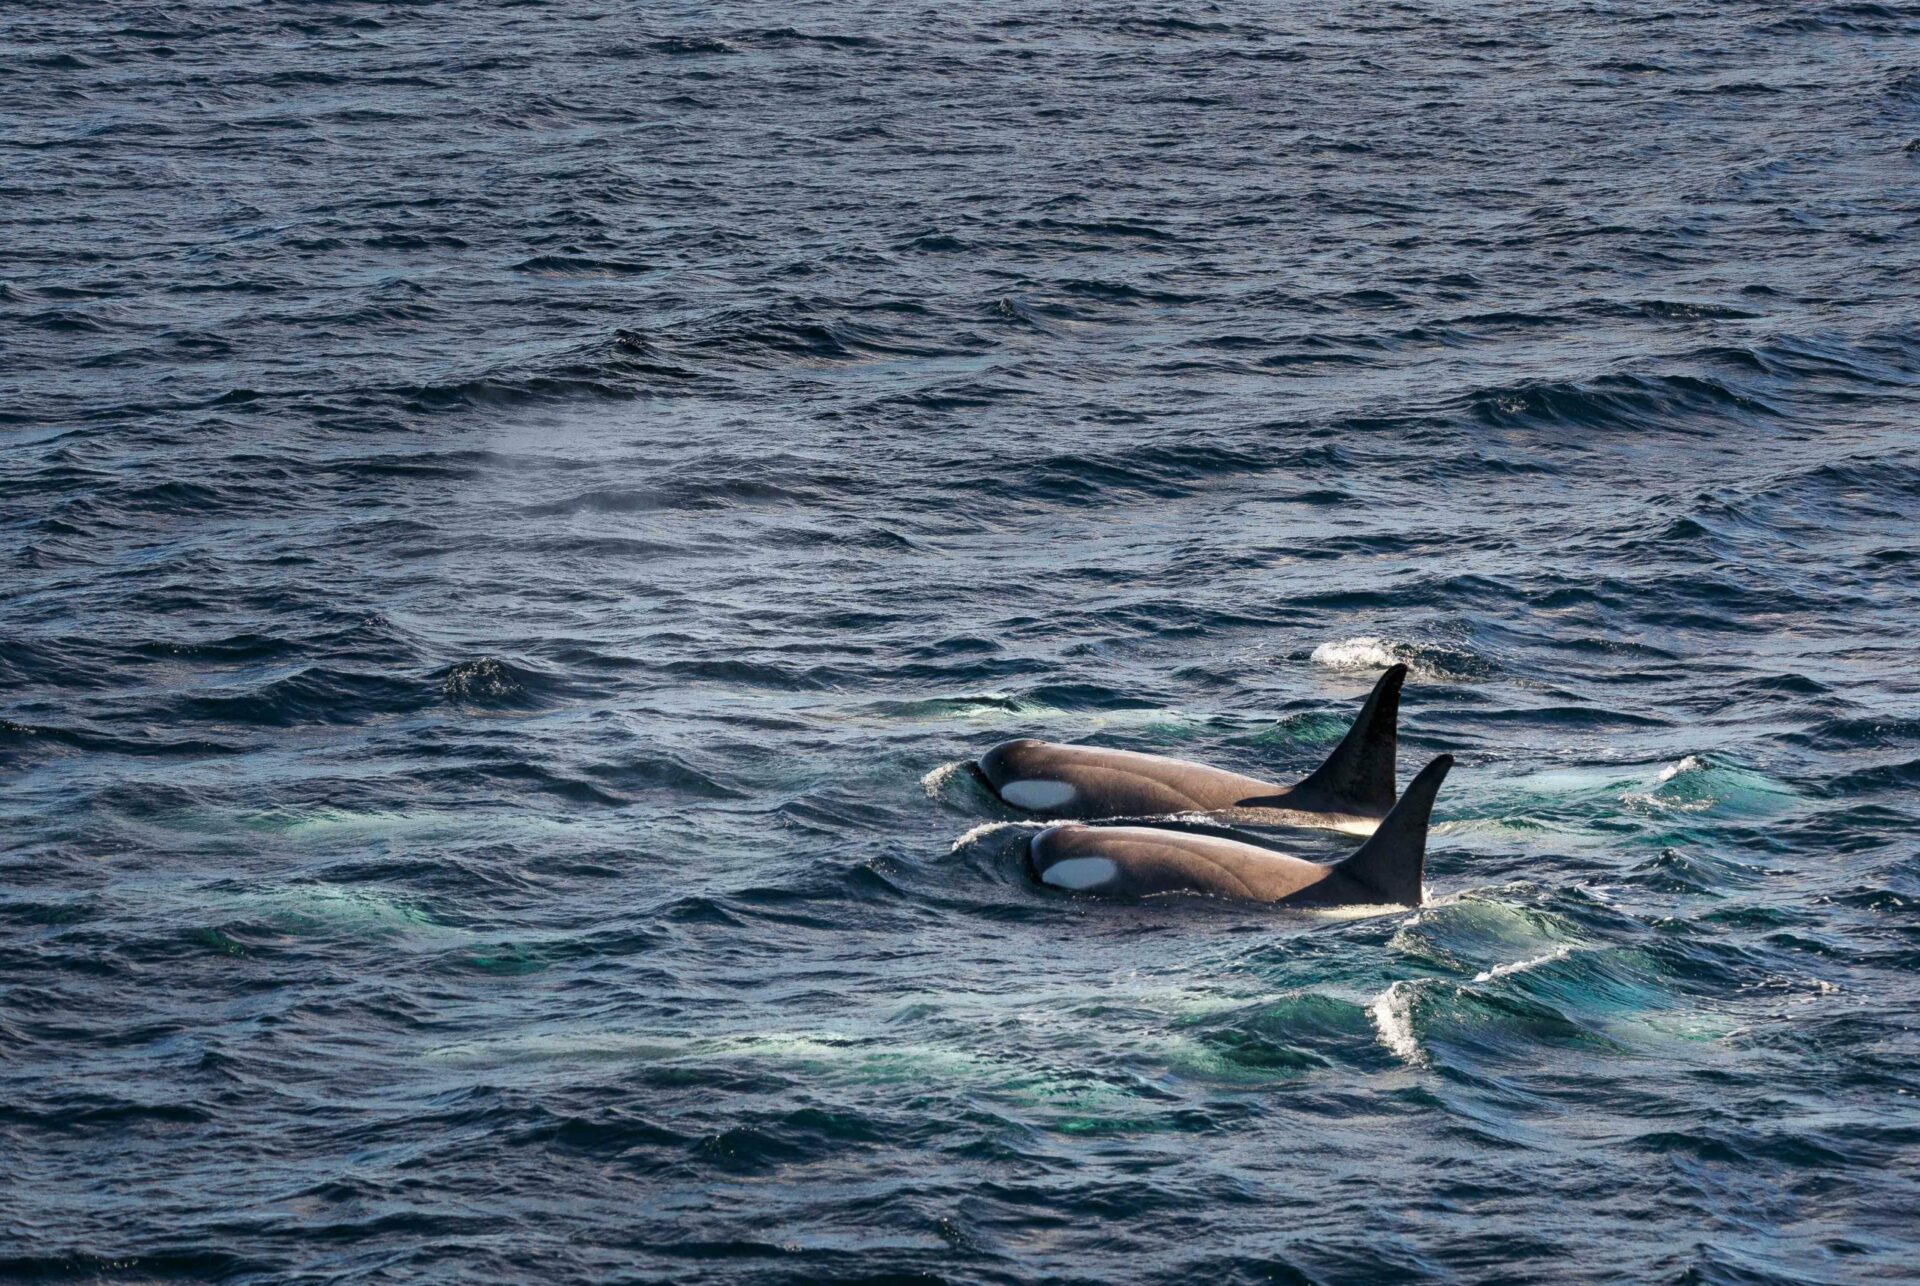 two orcas swimming side by side and surfacing in the waters of Antarctica